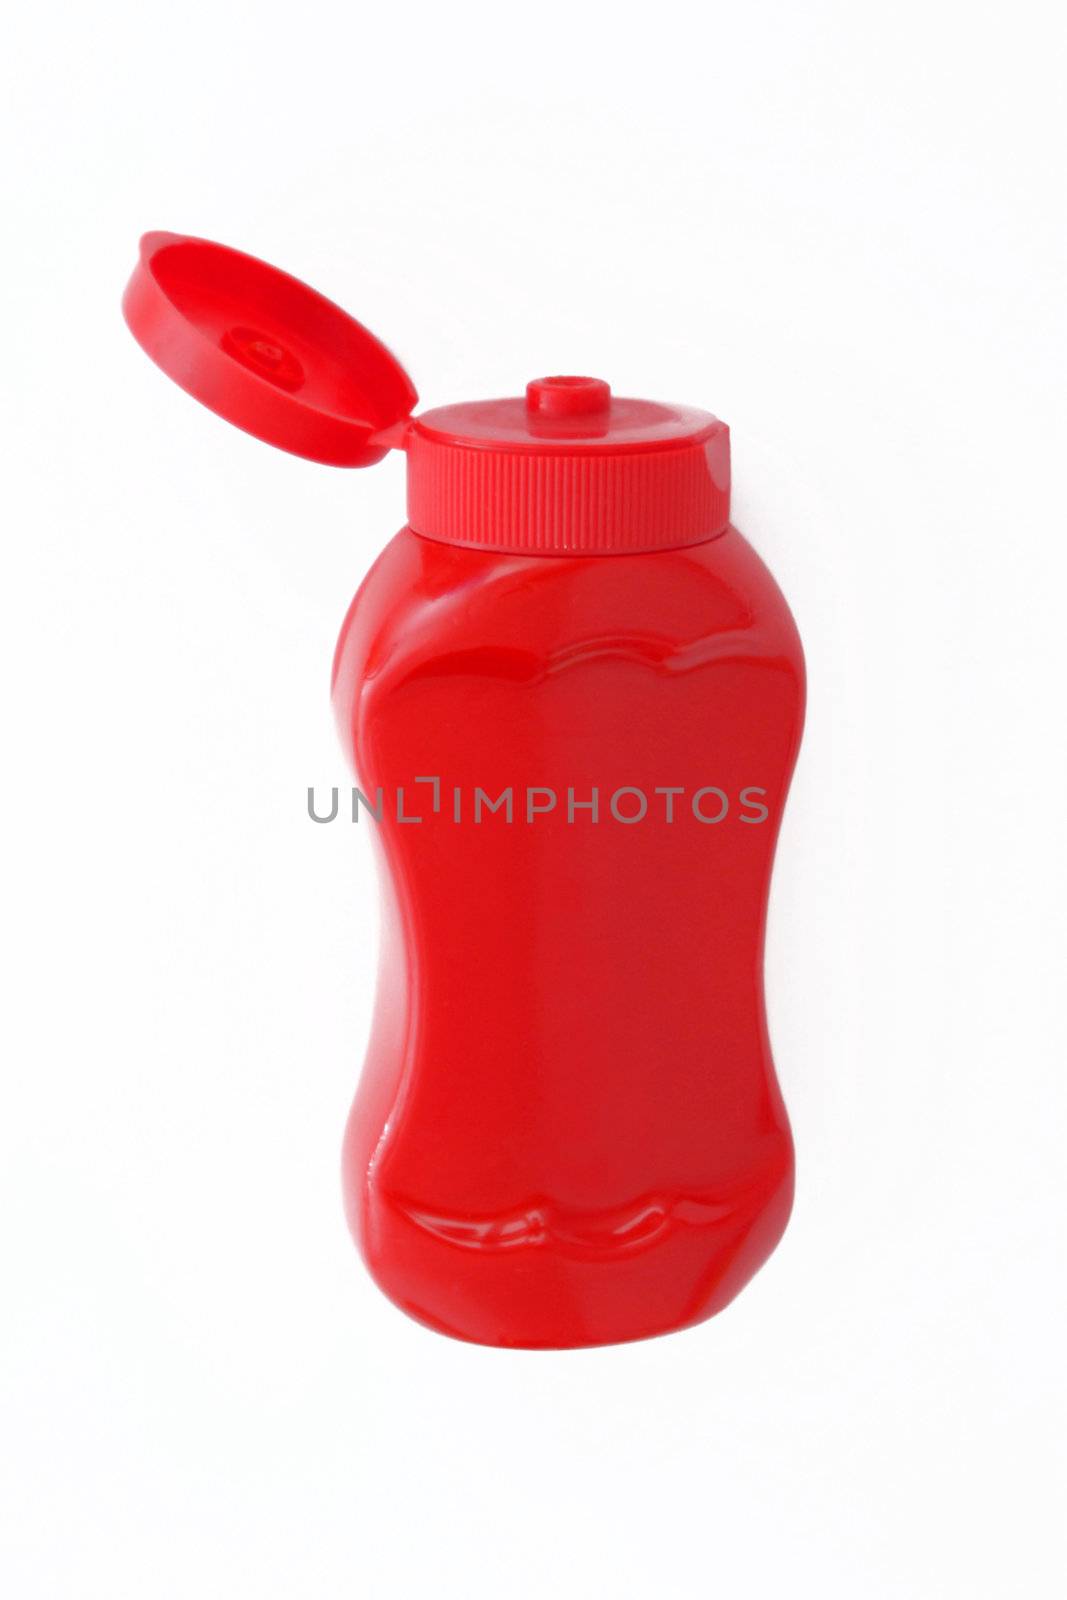 A red bottle of ketchup